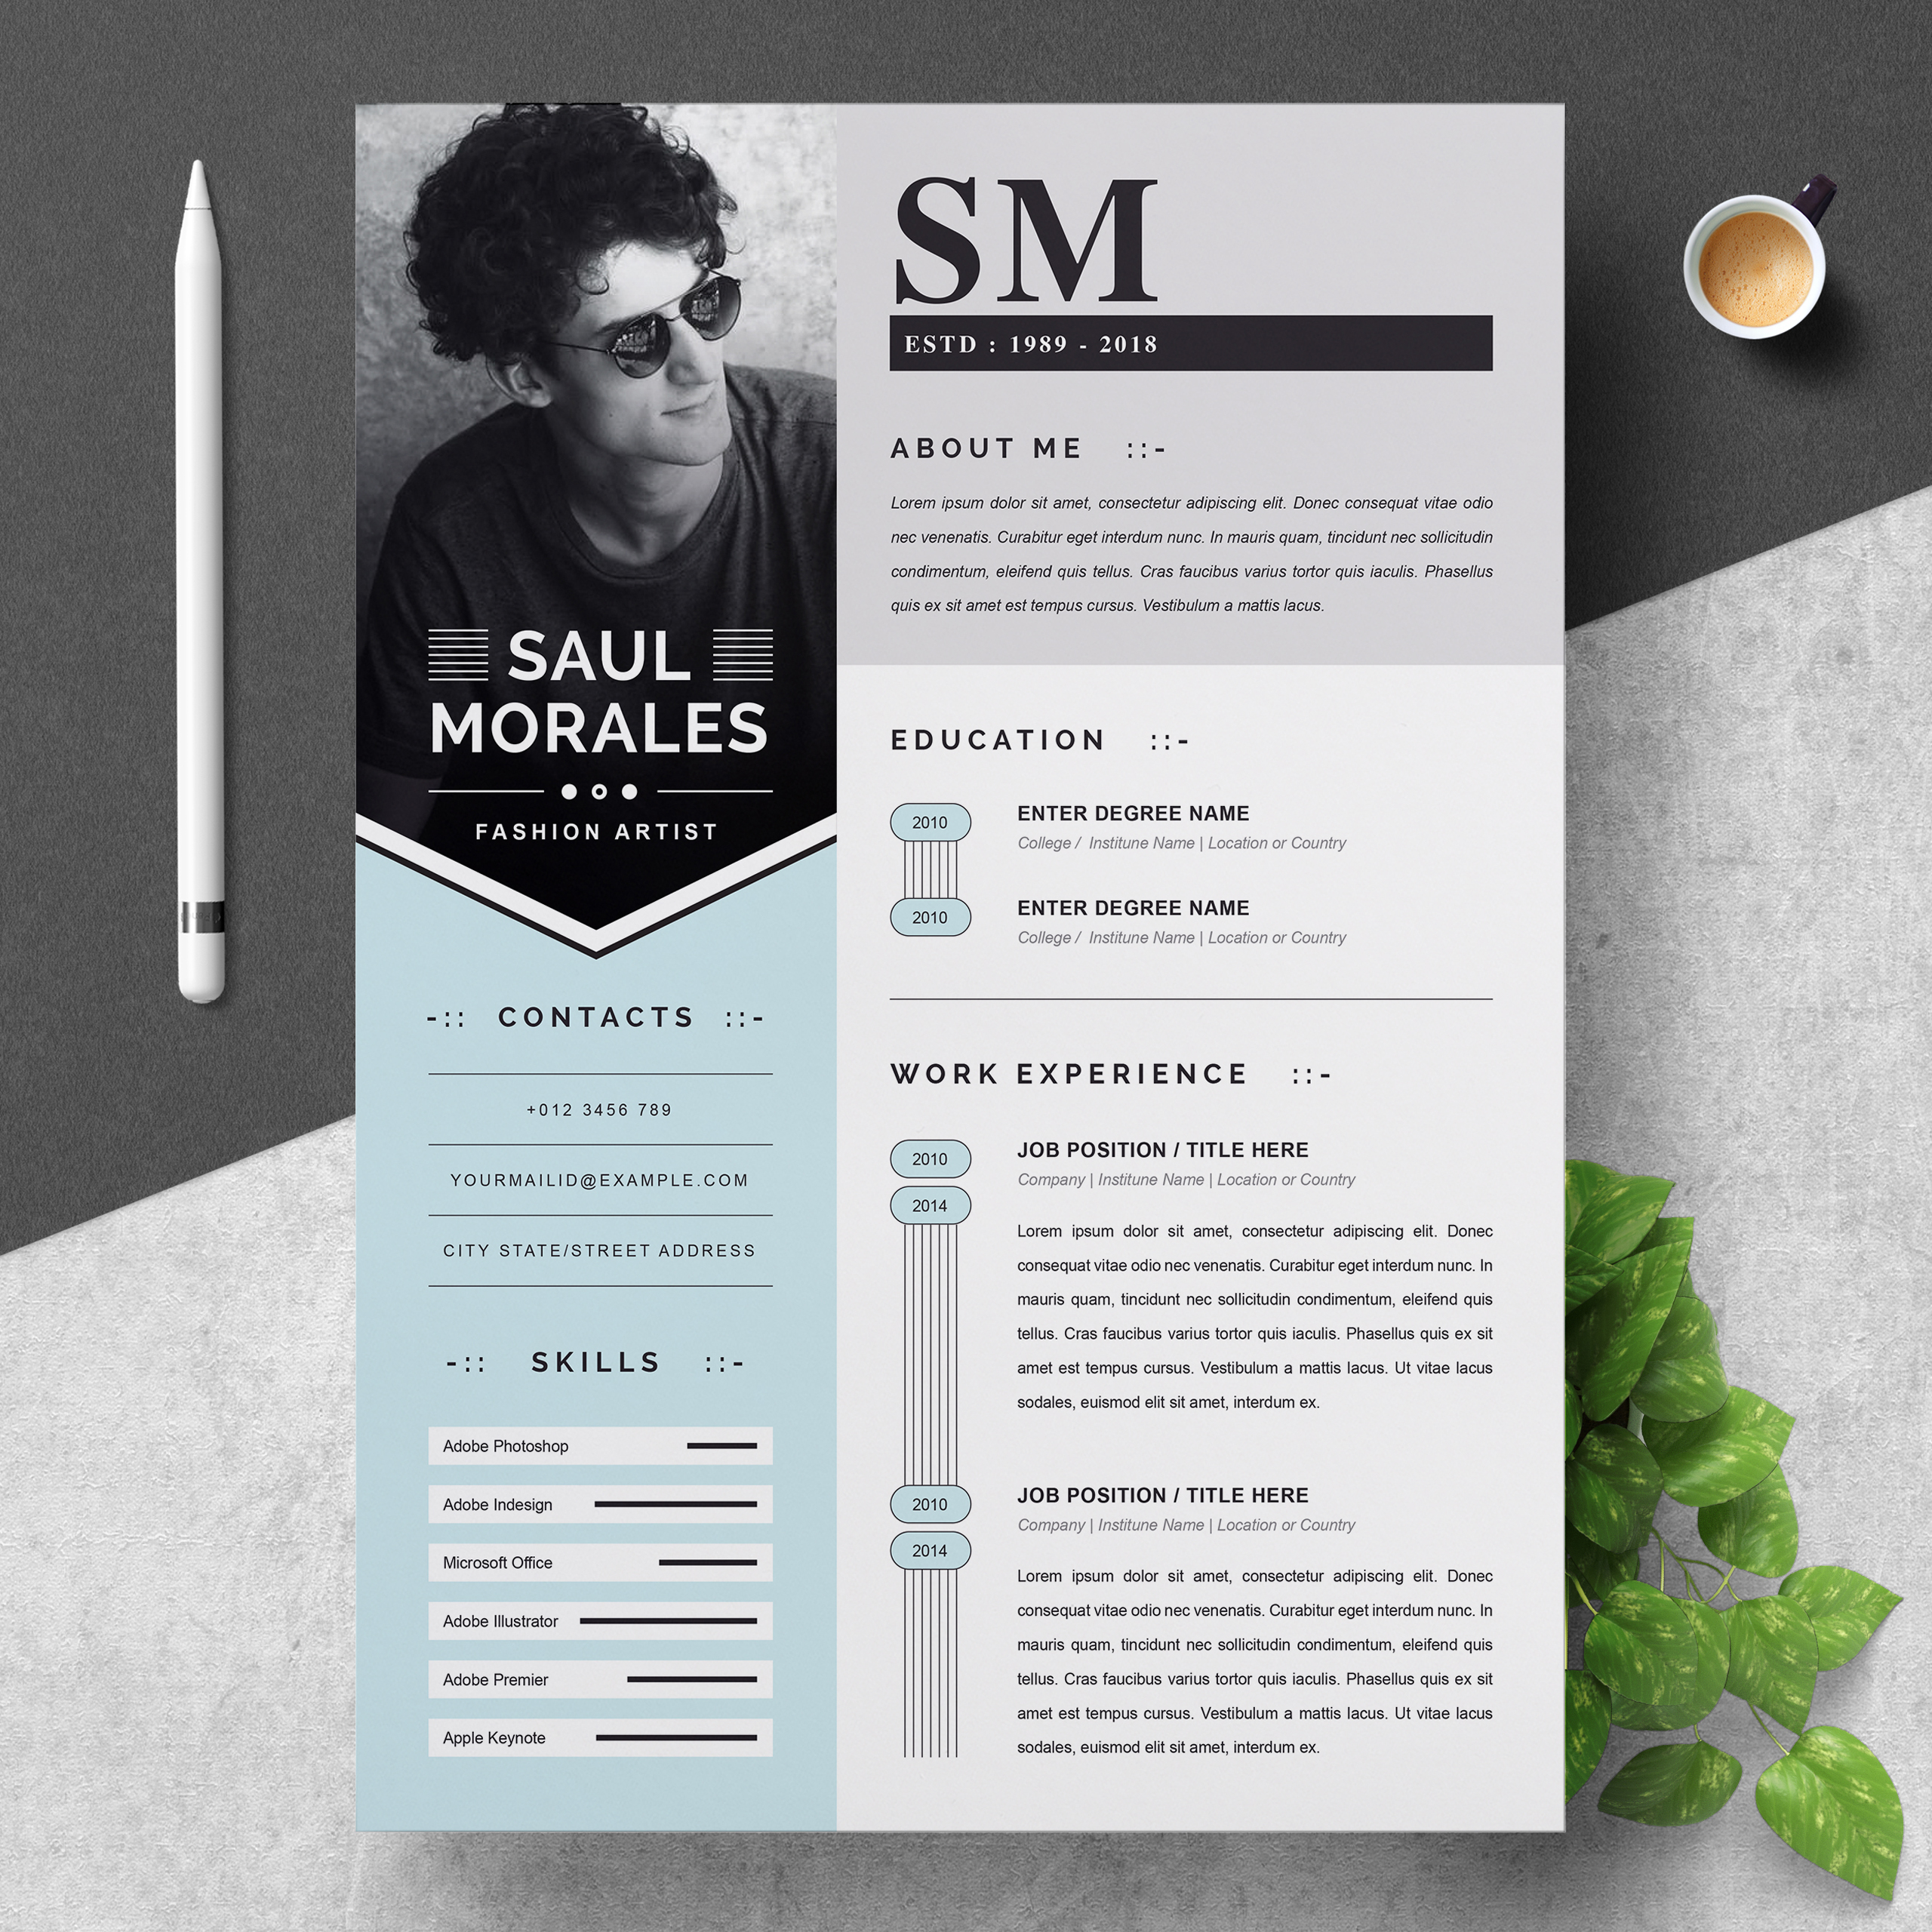 Creative Resume Templates 1860567 1558599483352 01 Clean Professional Creative And Modern Resume Cv Curriculum Vitae Design Template Ms Word Apple Pages Psd Free Download creative resume templates|wikiresume.com